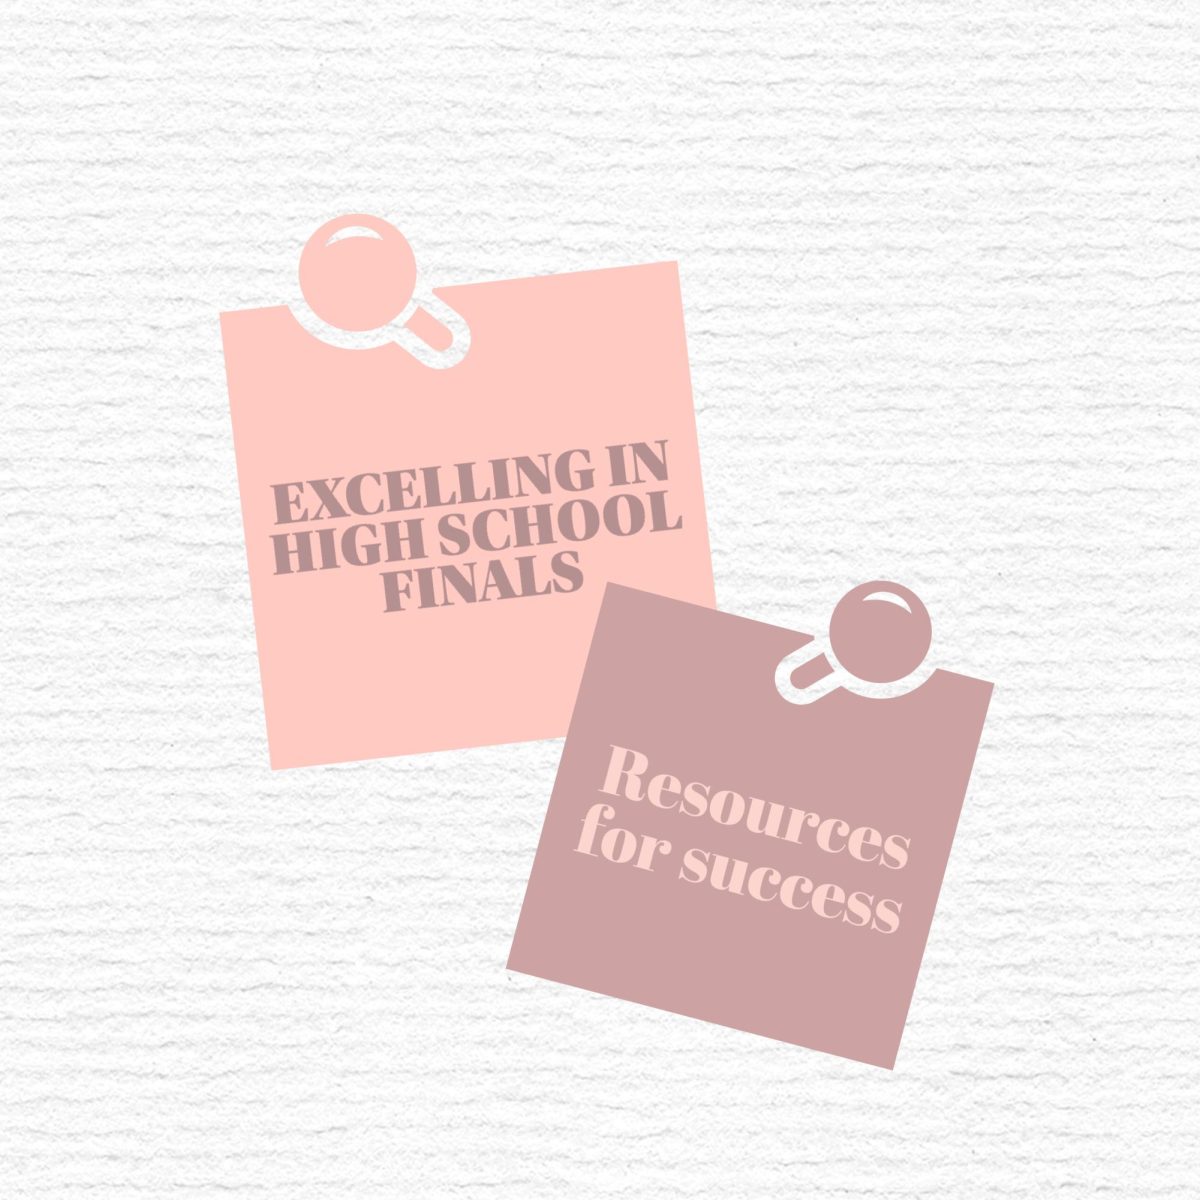 Excelling in high school finals: Resources for success